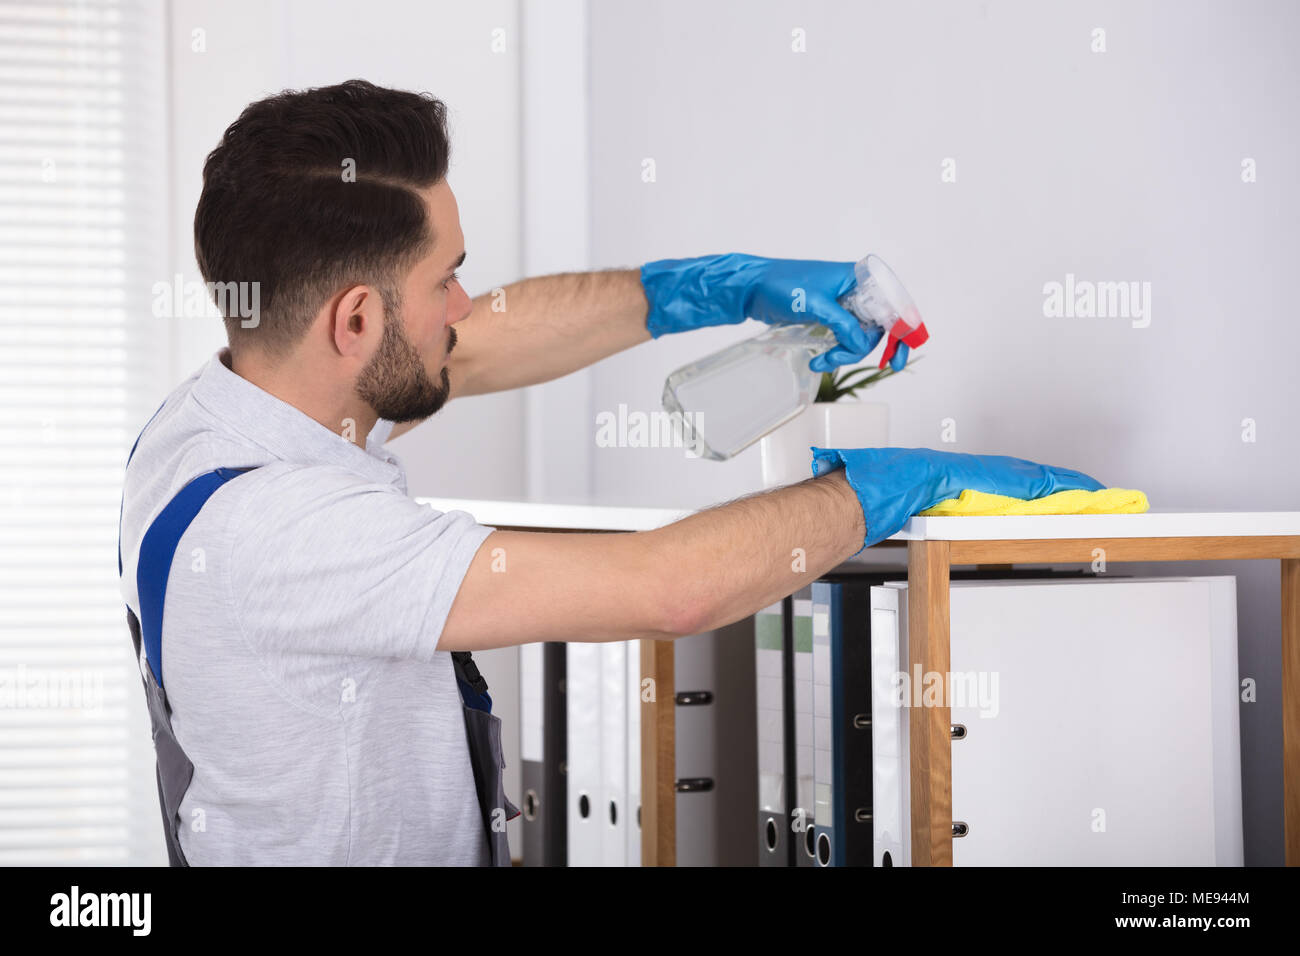 Close-up Of A Young Male Cleaner Cleaning Shelf At Workplace Stock Photo